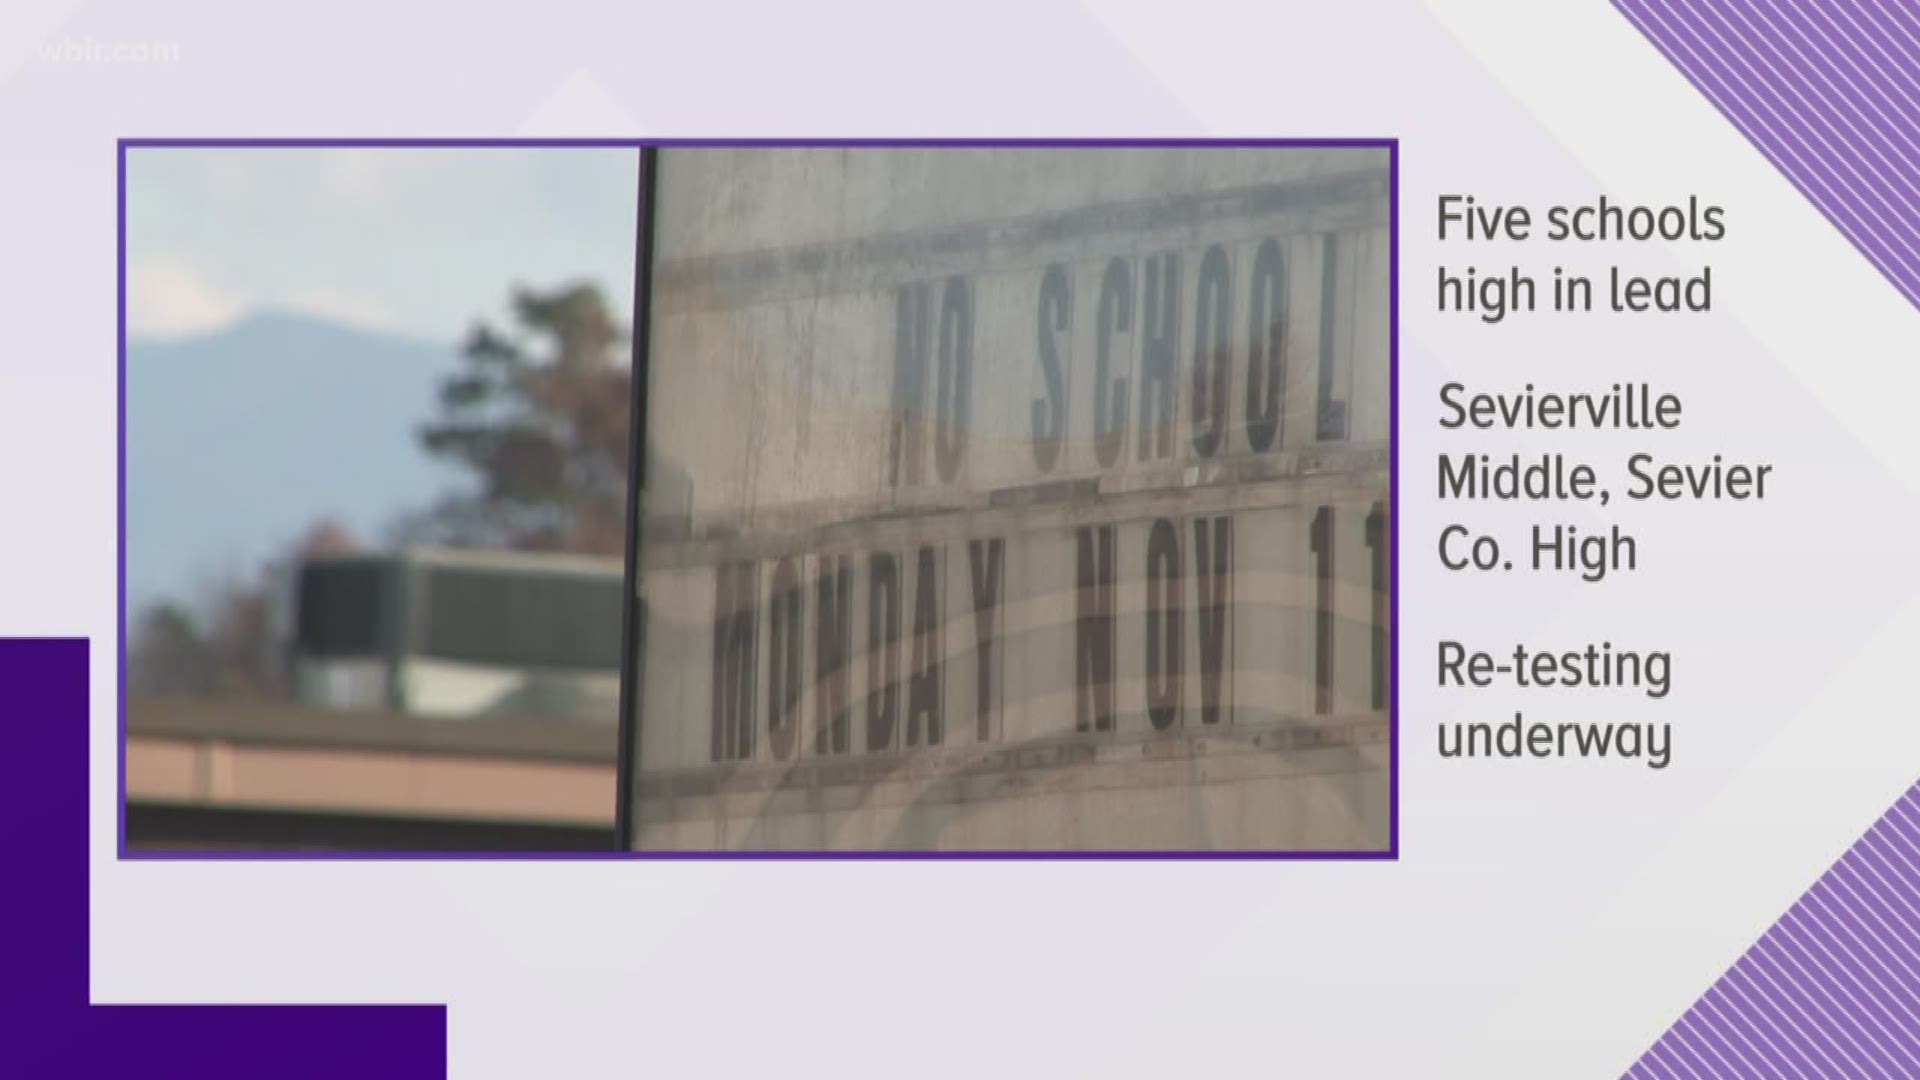 The five East Tennessee schools were tested for lead under a new state law. County officials say parents were informed and the water sources are repaired.